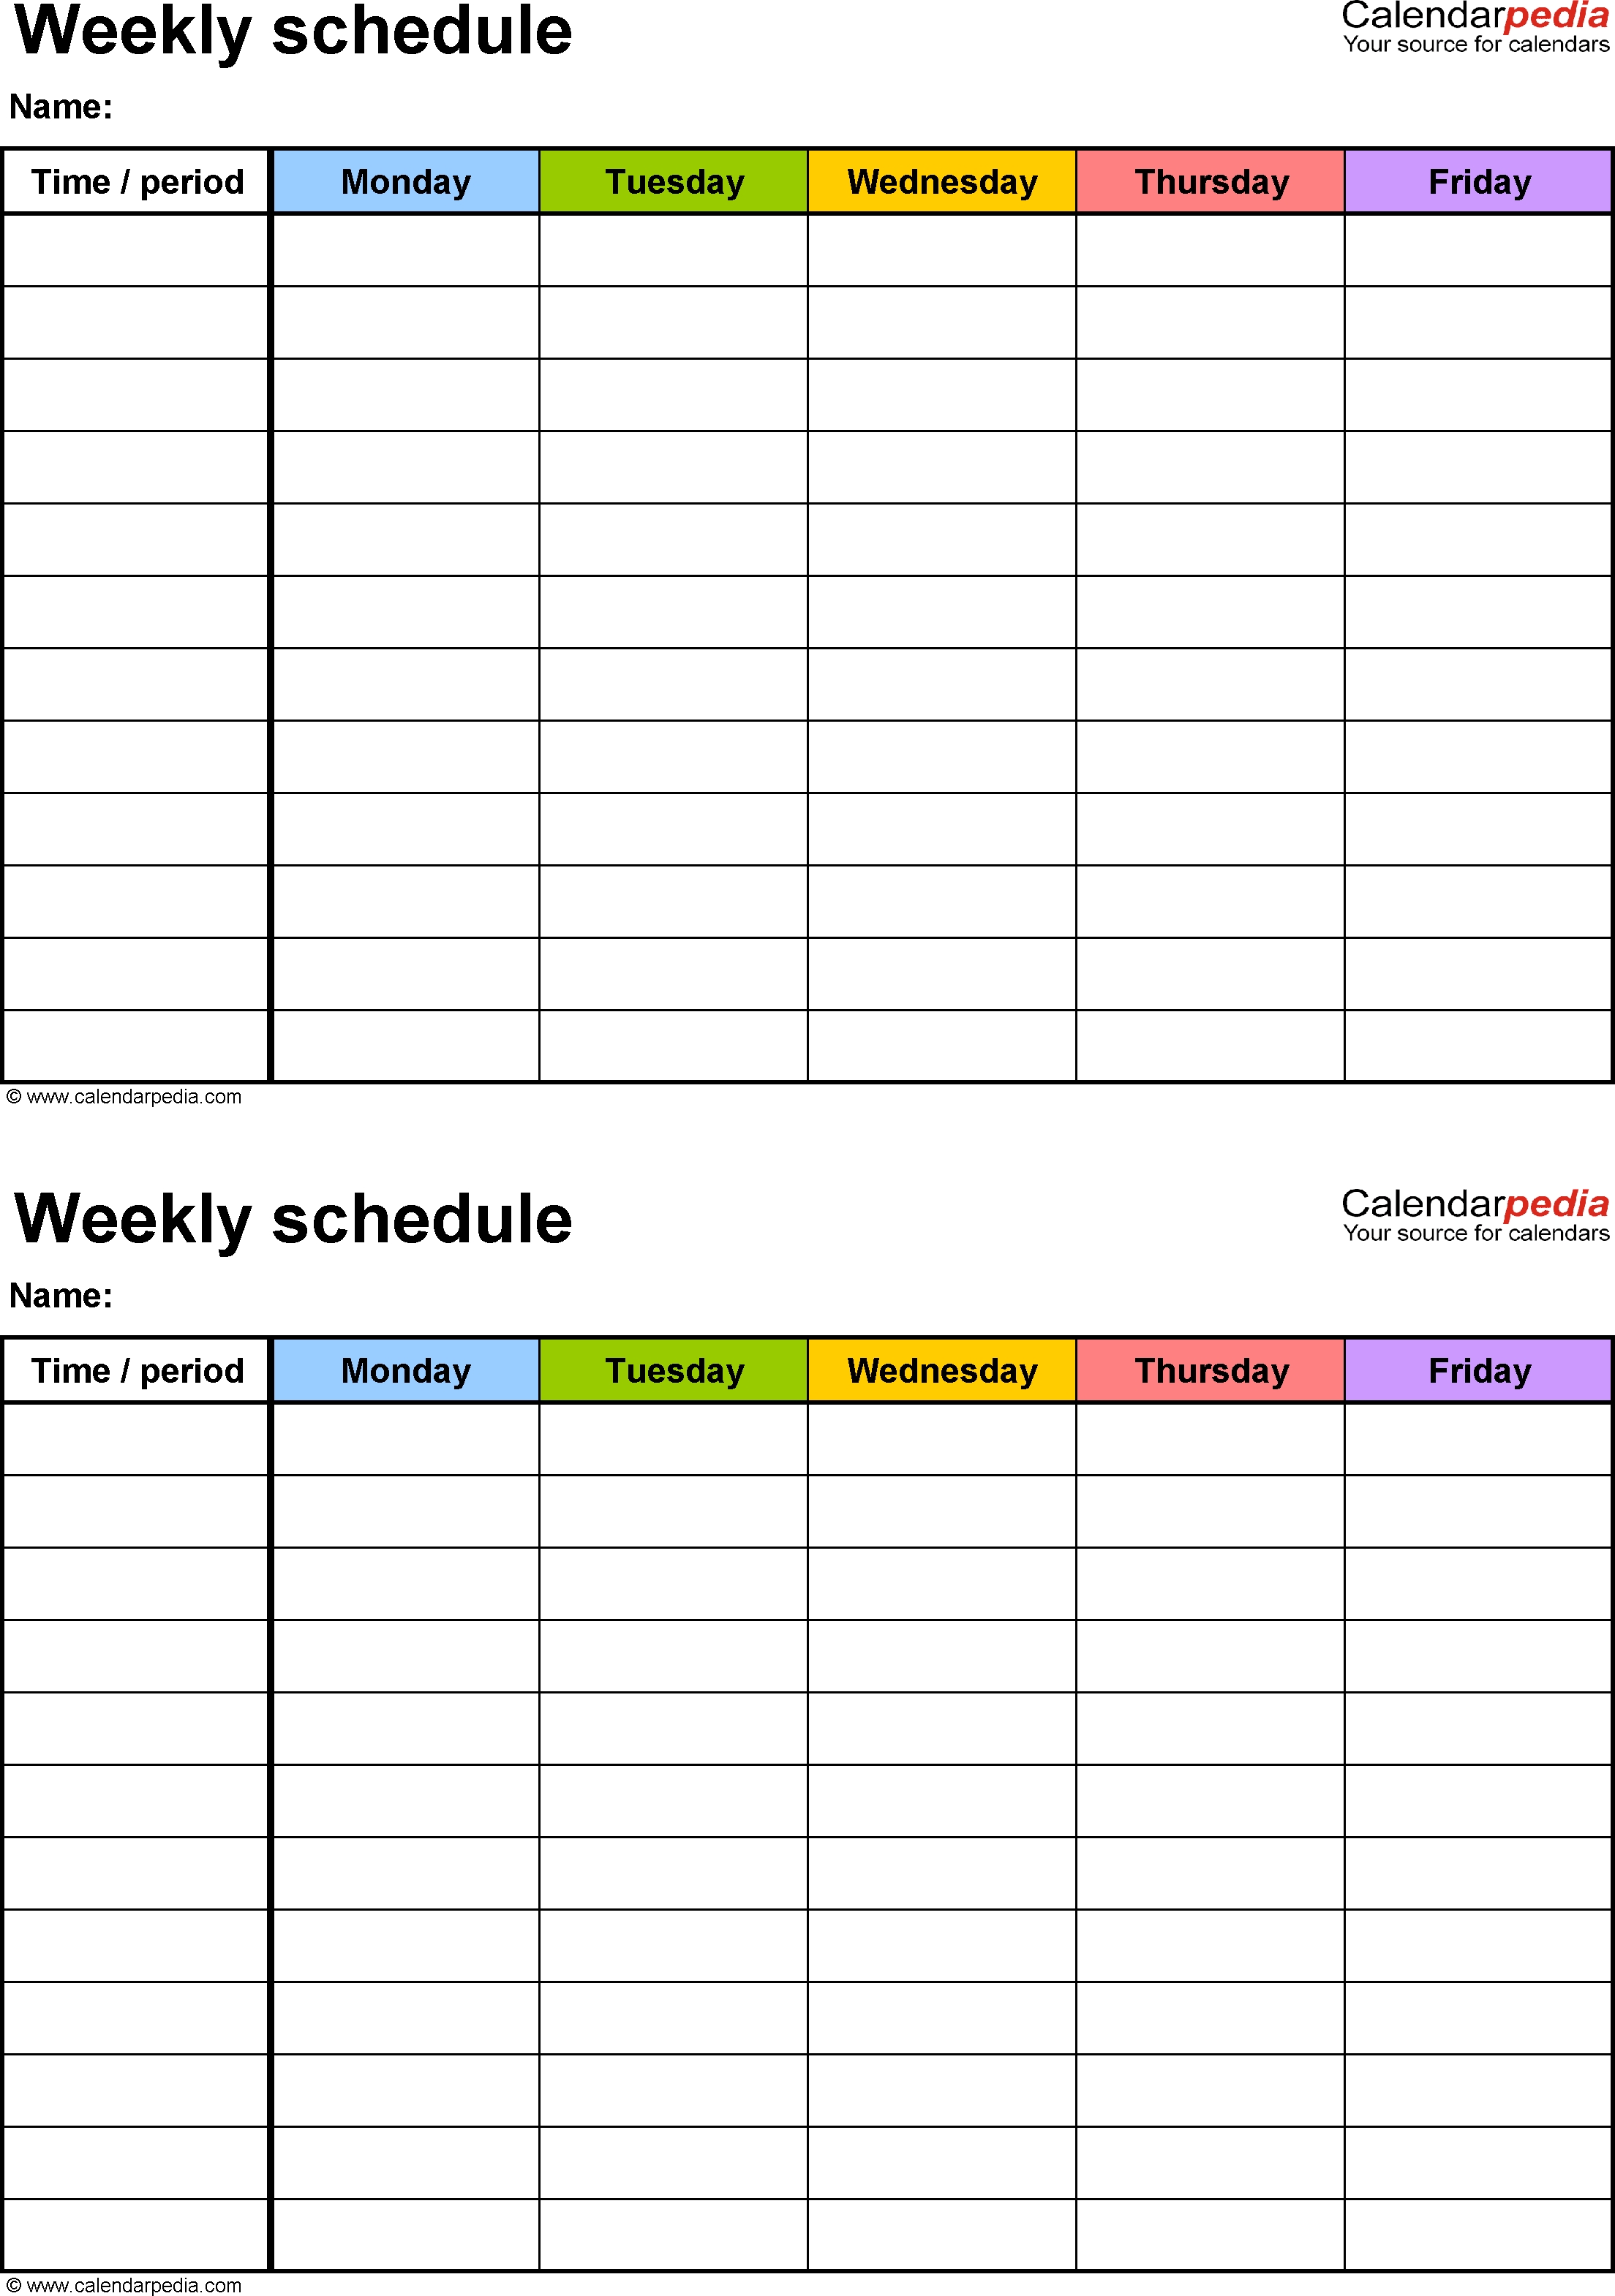 Free Weekly Schedule Templates For Word - 18 Templates within Weekly Planner Template For Students